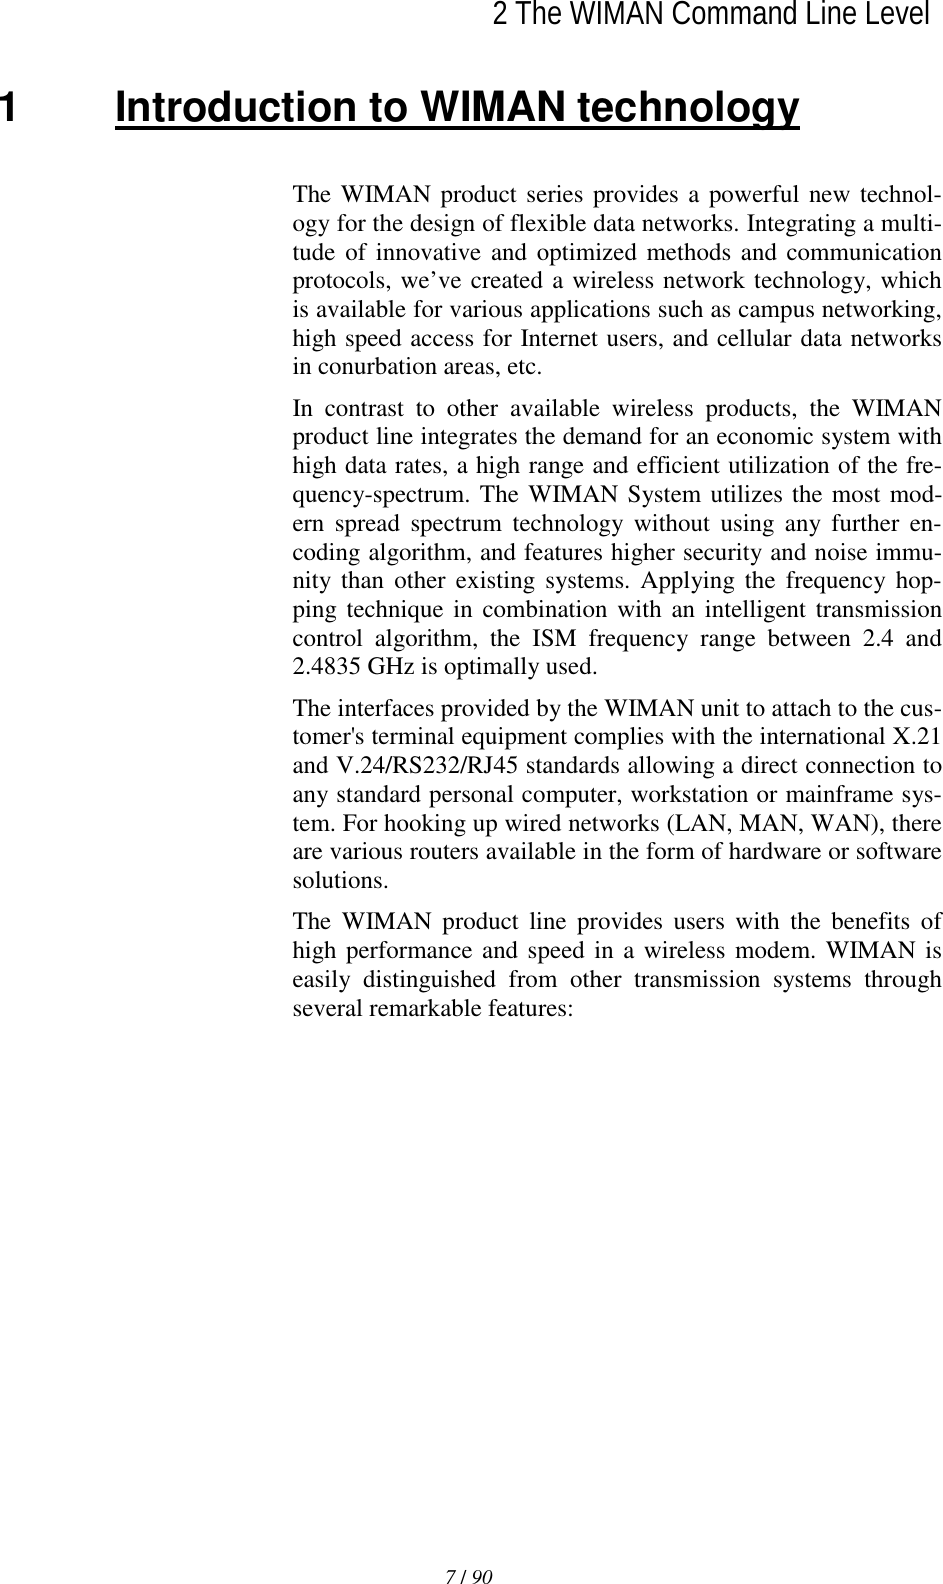   2 The WIMAN Command Line Level7 / 90l1  Introduction to WIMAN technology The WIMAN product series provides a powerful new technol-ogy for the design of flexible data networks. Integrating a multi-tude of innovative and optimized methods and communication protocols, we’ve created a wireless network technology, which is available for various applications such as campus networking, high speed access for Internet users, and cellular data networks in conurbation areas, etc. In contrast to other available wireless products, the WIMAN product line integrates the demand for an economic system with high data rates, a high range and efficient utilization of the fre-quency-spectrum. The WIMAN System utilizes the most mod-ern spread spectrum technology without using any further en-coding algorithm, and features higher security and noise immu-nity than other existing systems. Applying the frequency hop-ping technique in combination with an intelligent transmission control algorithm, the ISM frequency range between 2.4 and 2.4835 GHz is optimally used. The interfaces provided by the WIMAN unit to attach to the cus-tomer&apos;s terminal equipment complies with the international X.21 and V.24/RS232/RJ45 standards allowing a direct connection to any standard personal computer, workstation or mainframe sys-tem. For hooking up wired networks (LAN, MAN, WAN), there are various routers available in the form of hardware or software solutions. The WIMAN product line provides users with the benefits of high performance and speed in a wireless modem. WIMAN is easily distinguished from other transmission systems through several remarkable features: 